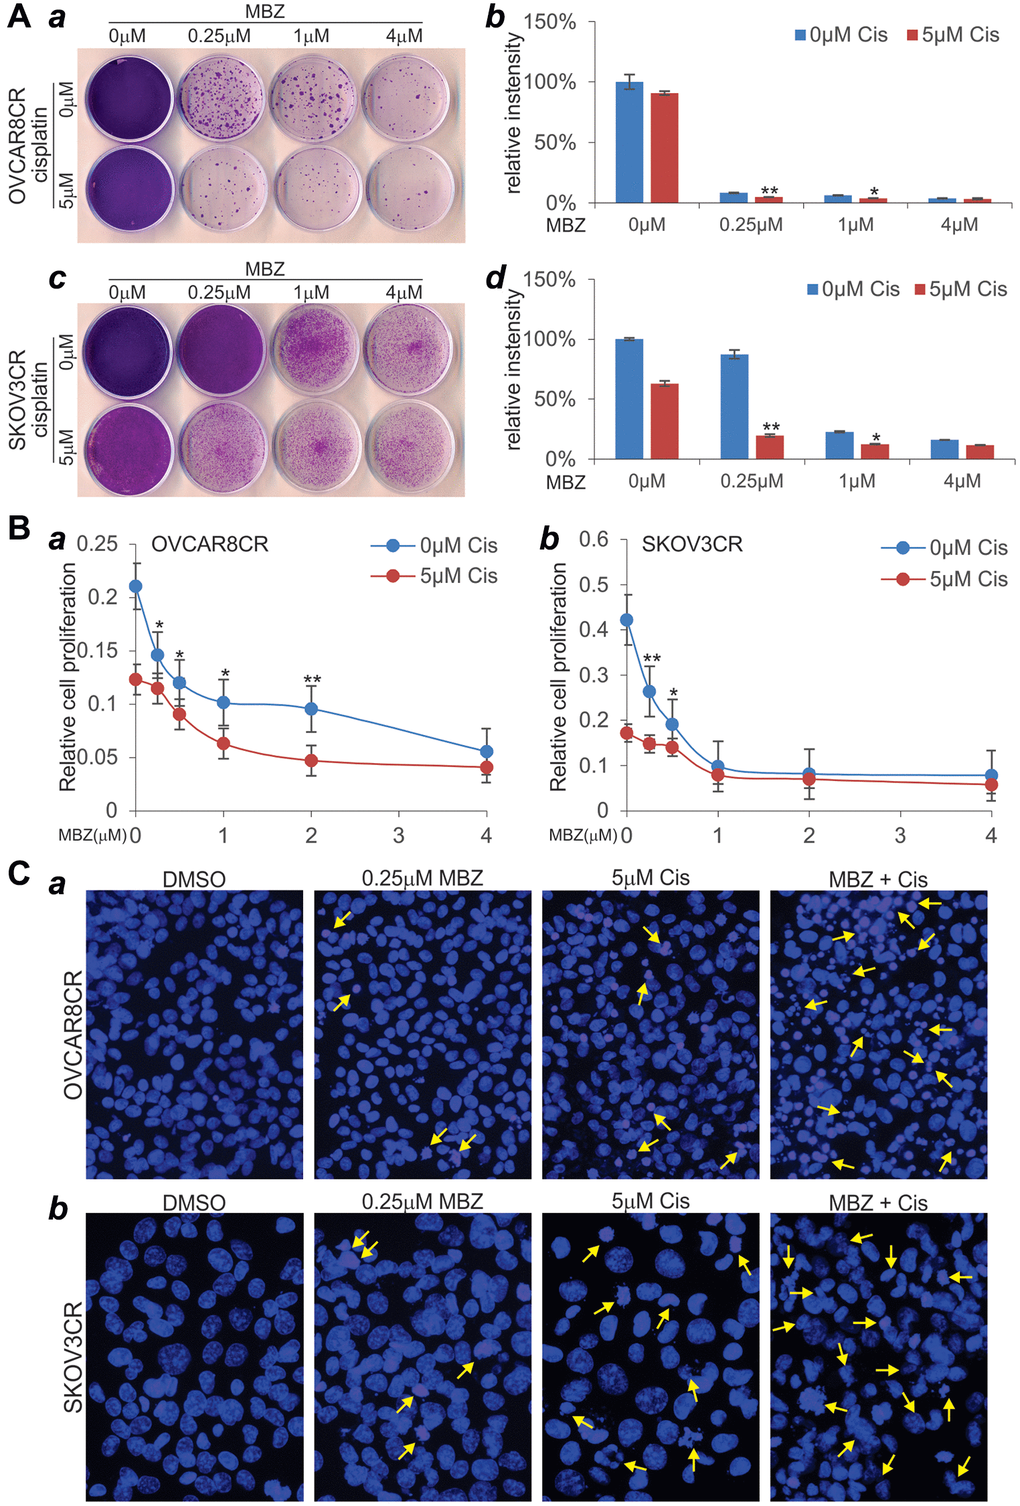 MBZ synergizes with cisplatin to inhibit cell proliferation and induce apoptosis in the human CR ovarian cancer cells. (A) Colony formation and crystal violet cell viability assay. Subconfluent OVCAR8CR (a, b) and SKOV3CR (c, d) cells were treated with MBZ and cisplatin at the indicated concentrations. At 72 h post treatment, the cells were replated for colony formation for 10 days, followed by crystal violet staining (a, c). Each assay condition was done in triplicate. Representative results are shown (a, c). The stained cells were dissolved in acetic acid and quantitatively measured for optical absorbance (b, d). *p **p B) WST-1 cell proliferation assay. Subconfluent OVCAR8CR (a) and SKOV3CR (b) cells were seeded into 96-well cell culture plates, and treated with DMSO, cisplatin and/or MBZ at the indicated concentrations. At 72 h post treatment, WST-1 working mix was added to each well and incubated for 2h prior to absorbance reading at 450nm. Each assay condition was done in triplicate. *p **p C) Cell apoptosis assay. Subconfluent OVCAR8CR (a) and SKOV3CR (b) cells were seeded into 6-well cell culture plates, and treated with DMSO, 5 μM cisplatin (Cis) and/or 0.25 μM MBZ. At 72 h, the cells were collected, fixed, stained with Hoechst33258, and examined under a fluorescence microscope. Representative images are shown. Representative apoptotic cells are indicated by arrows.